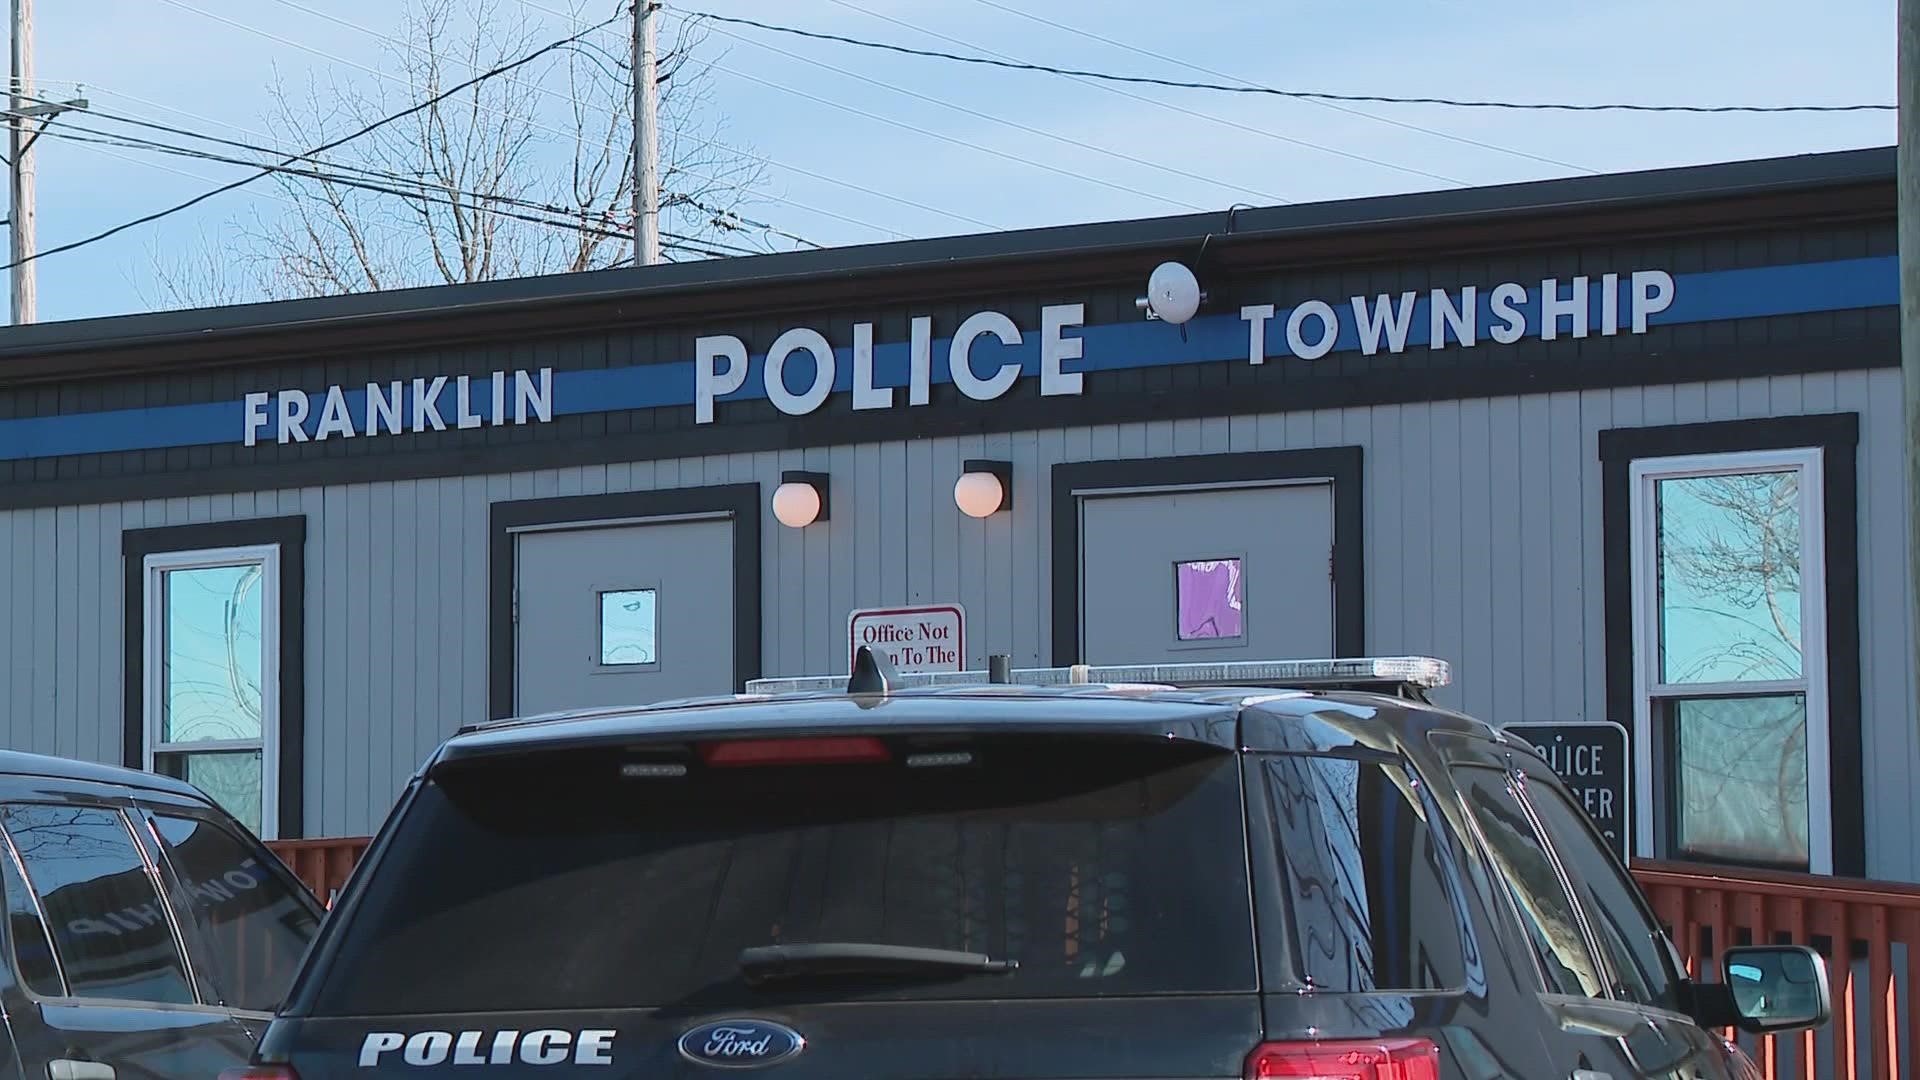 Franklin Township Police Department hopes to rebuild